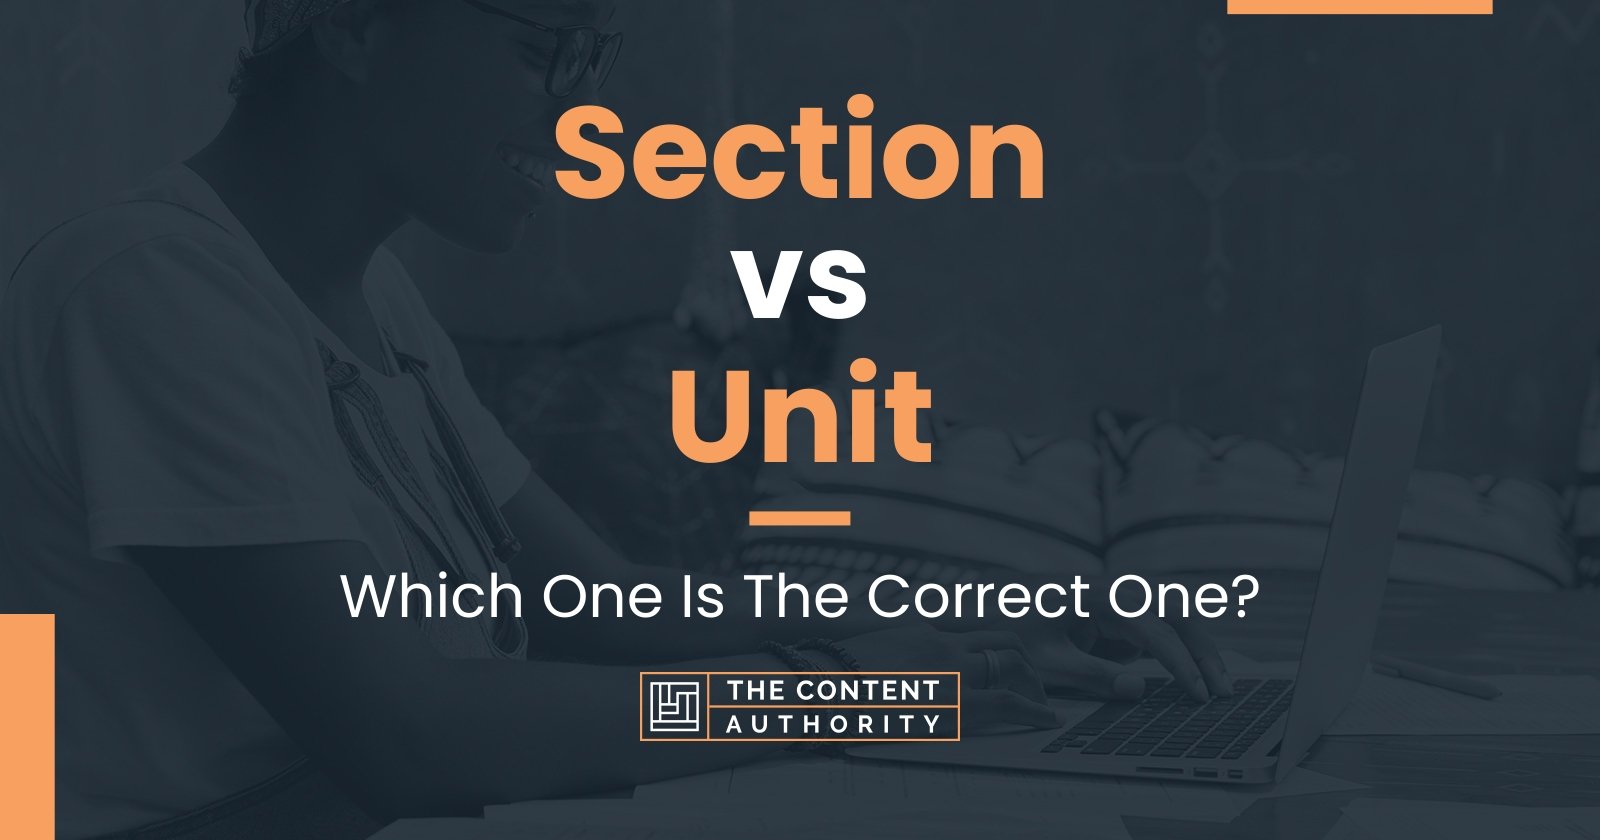 Section vs Unit: Which One Is The Correct One?